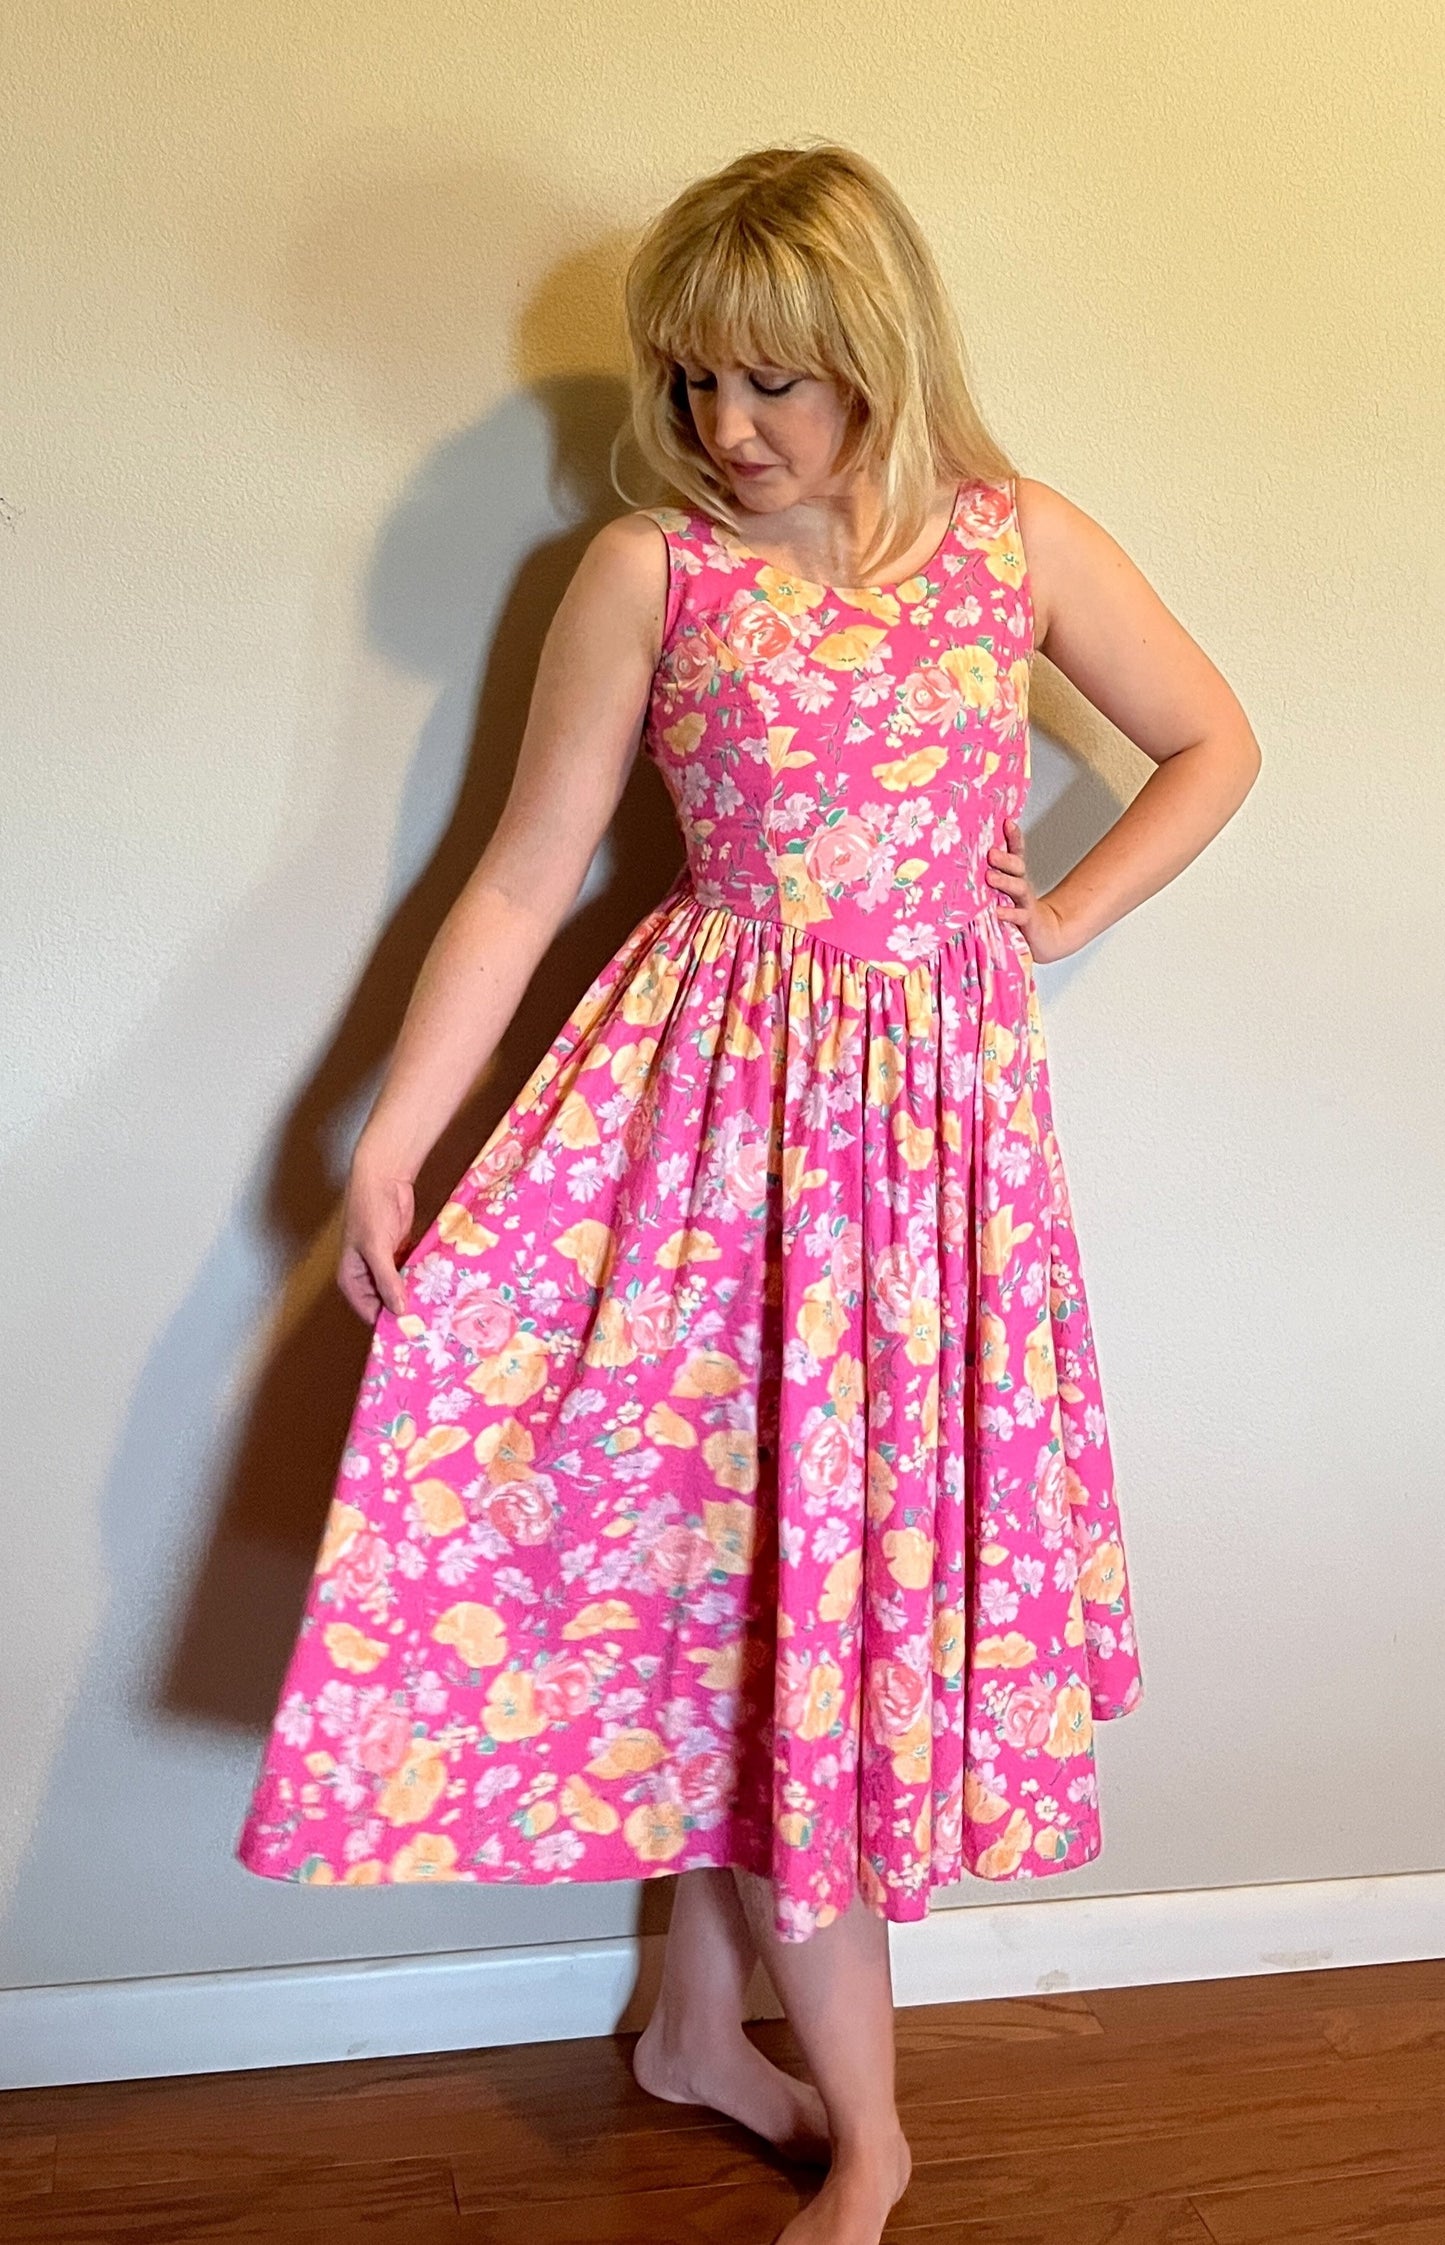 Vintage 1980's "Laura Ashley" Pink & Yellow Floral Dress (Altered)